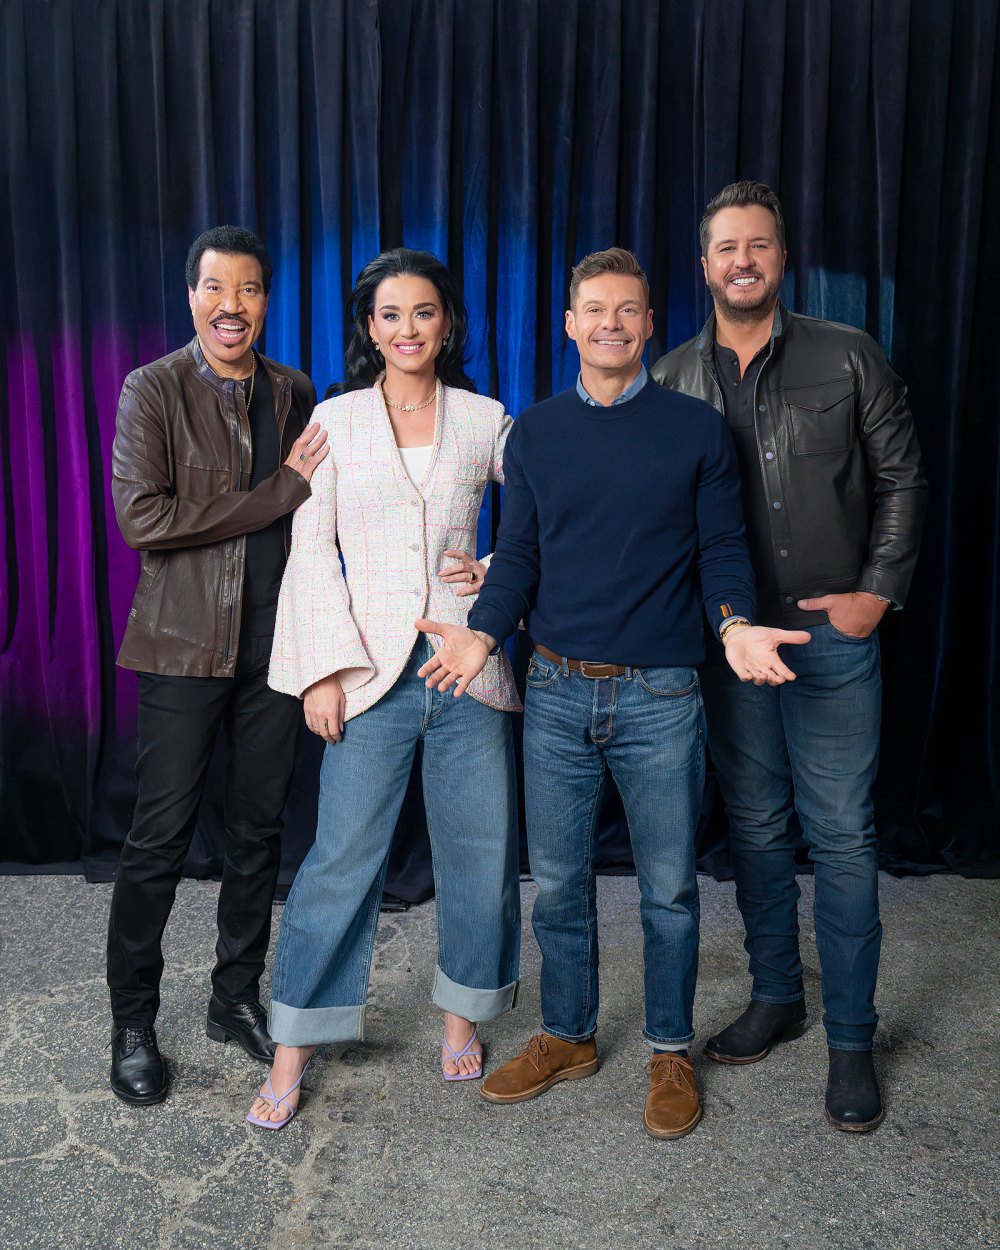 Luke Bryan Not Surprised by Katy Perry American Idol Exit Announcement 3